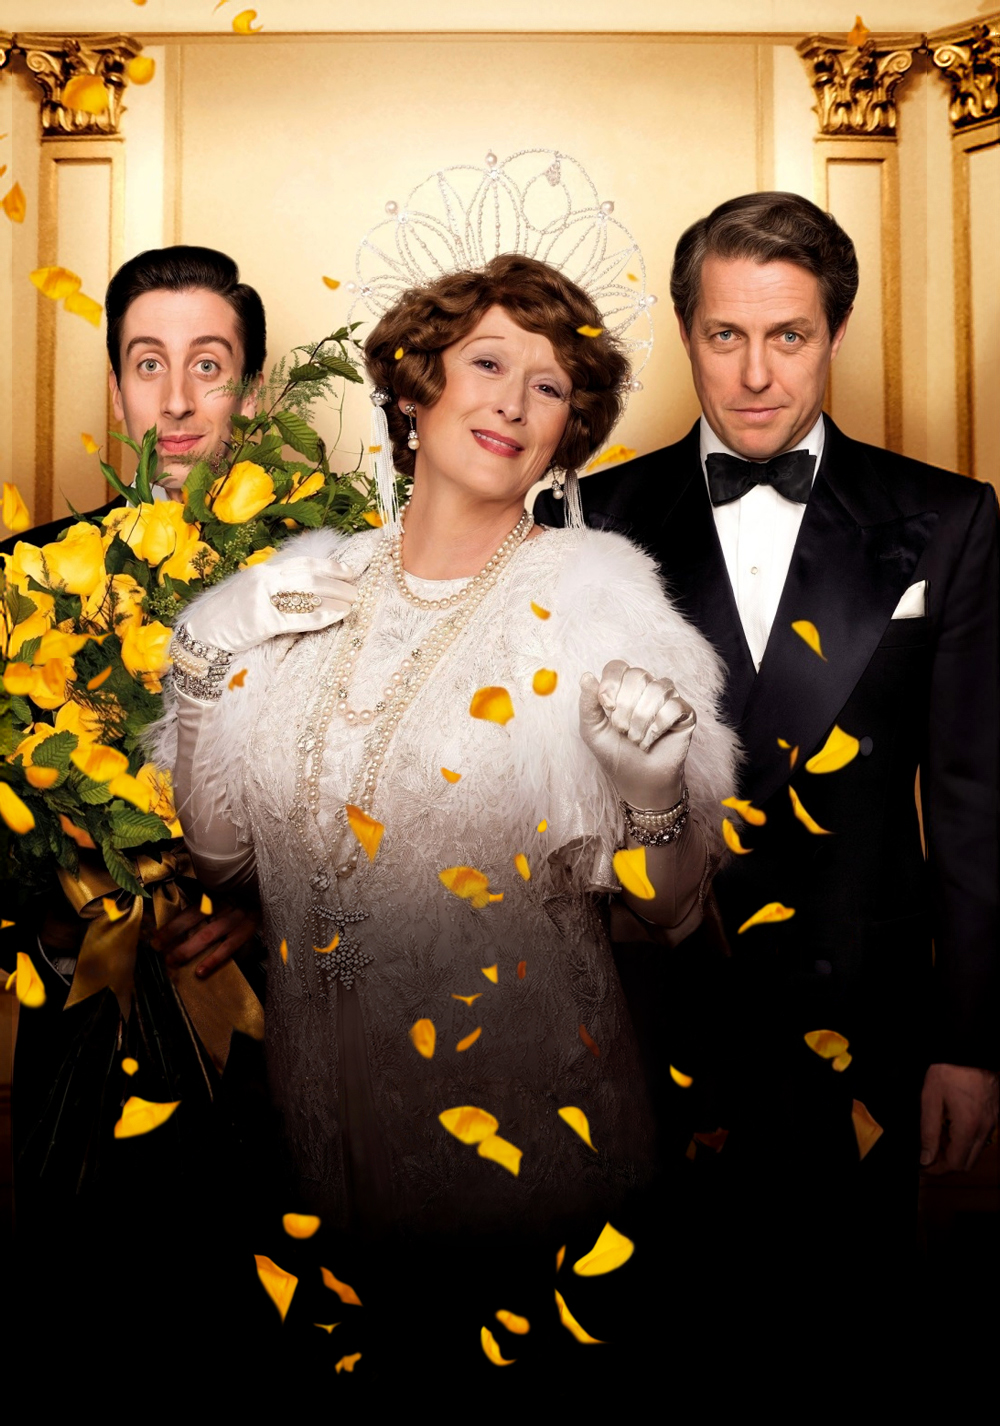 Florence Foster Jenkins Picture